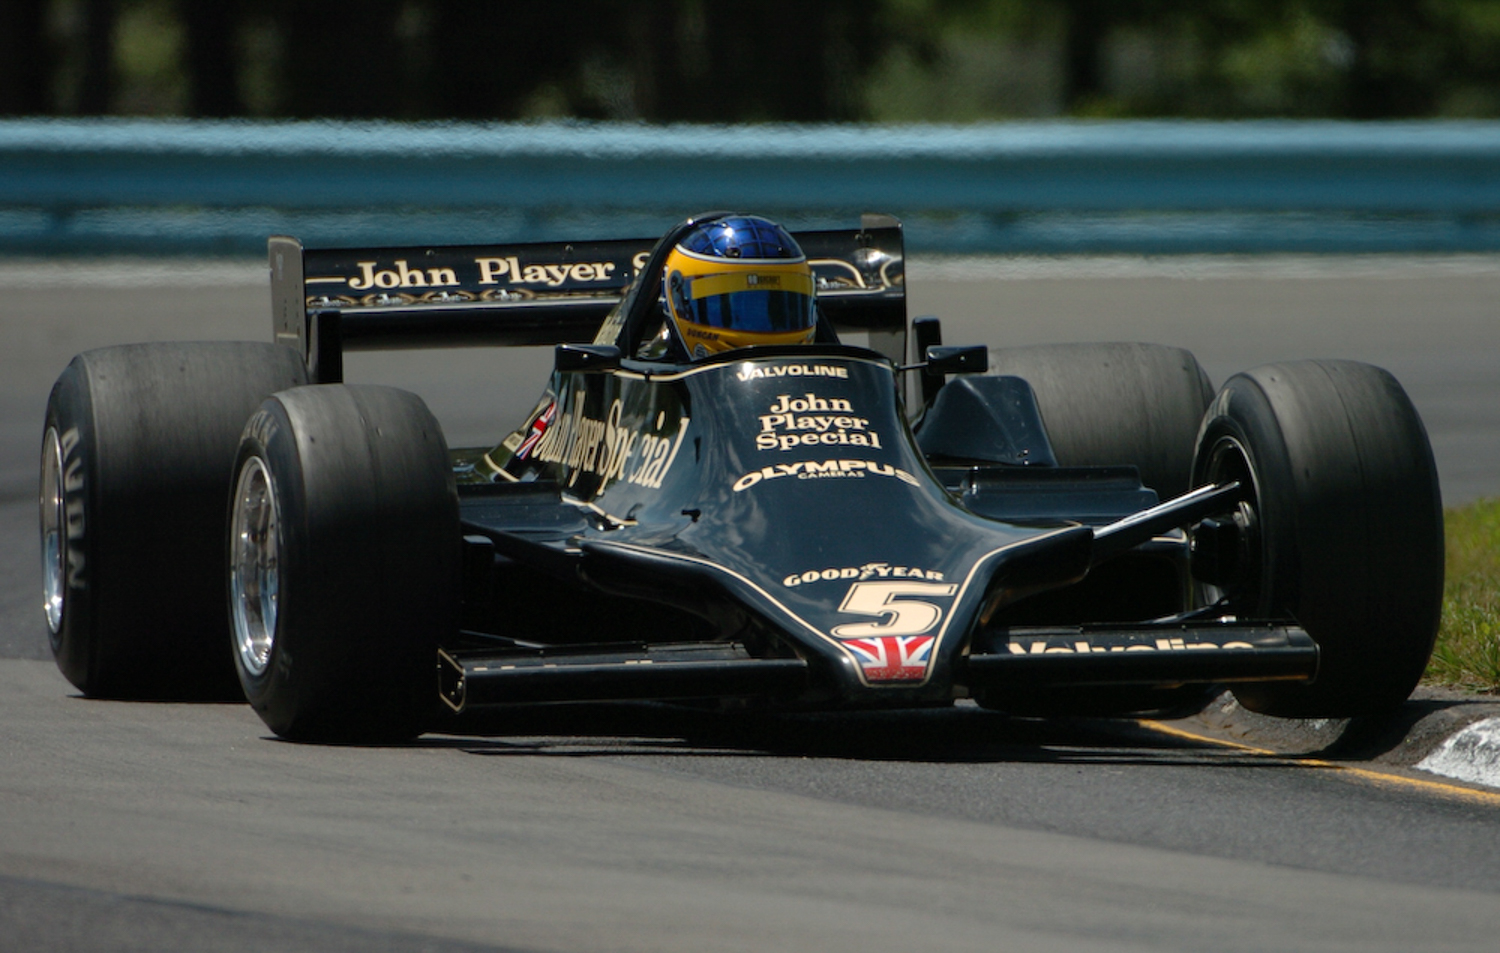 Duncan Dayton, rides up on the curbing in Mario Andretti's 1978 Lotus 79.